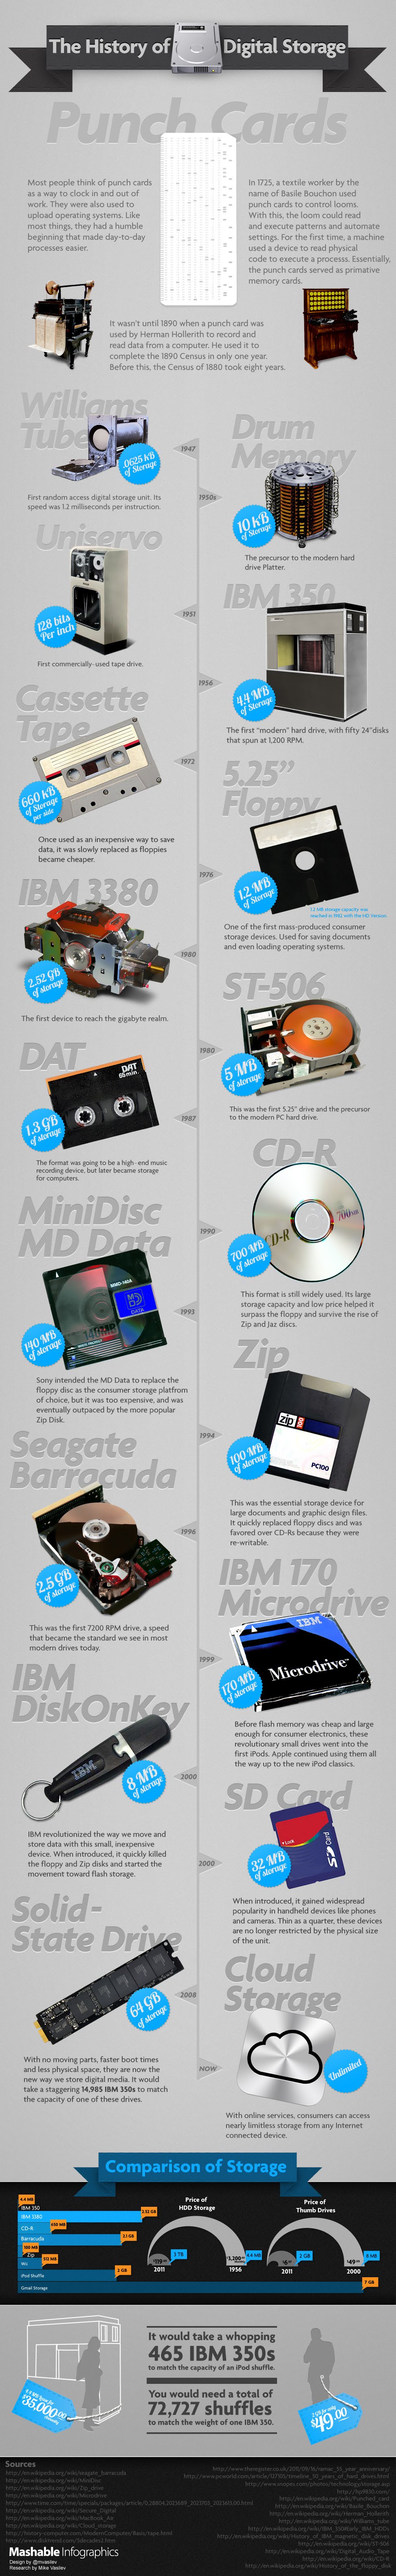 A Look at the History of Digital Storage #infographic